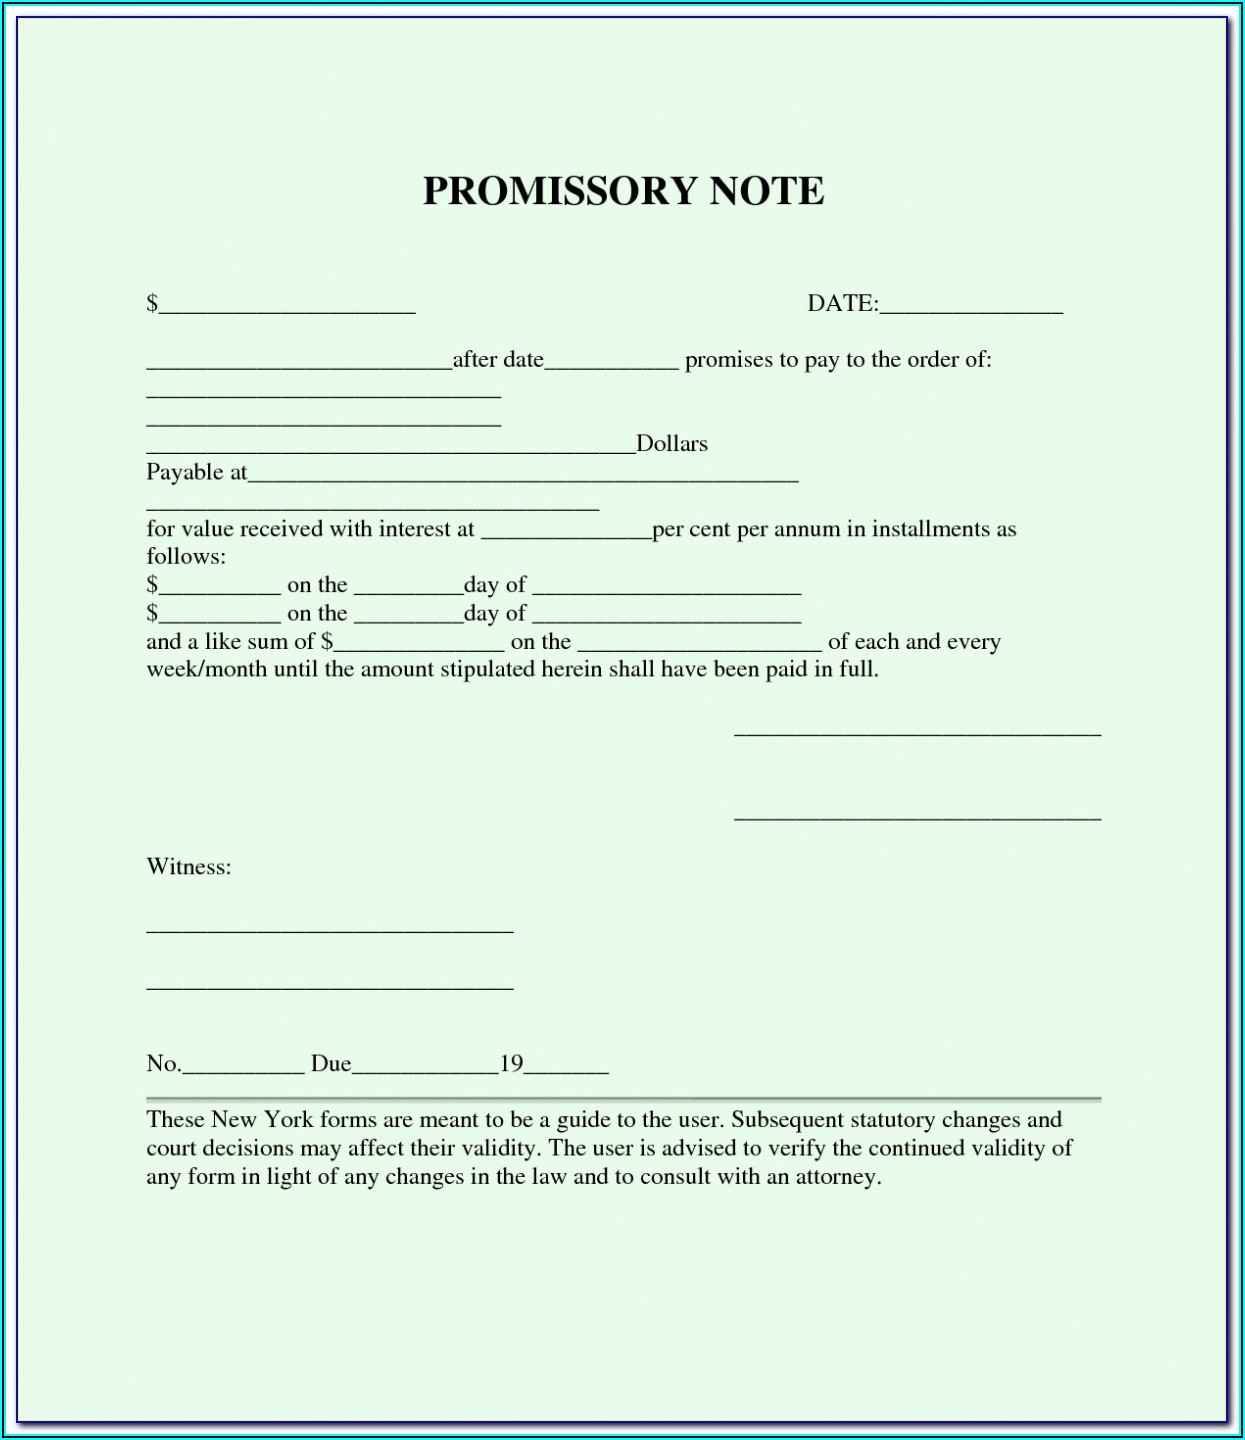 Florida Promissory Note (loan Agreement) Template